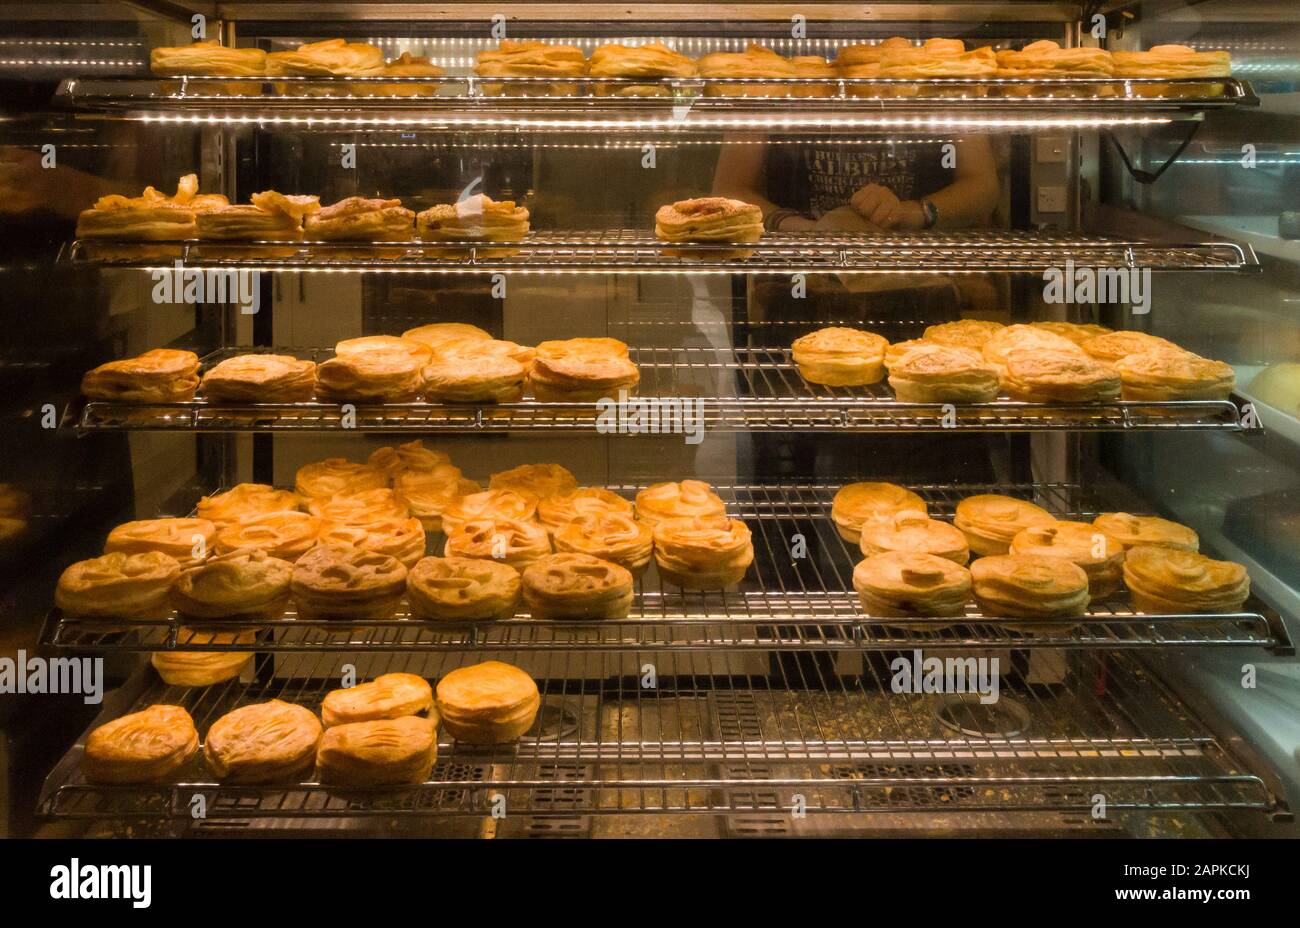 Meat pies. Bakehouse, Fairlie, New Zealand., Stock Photo